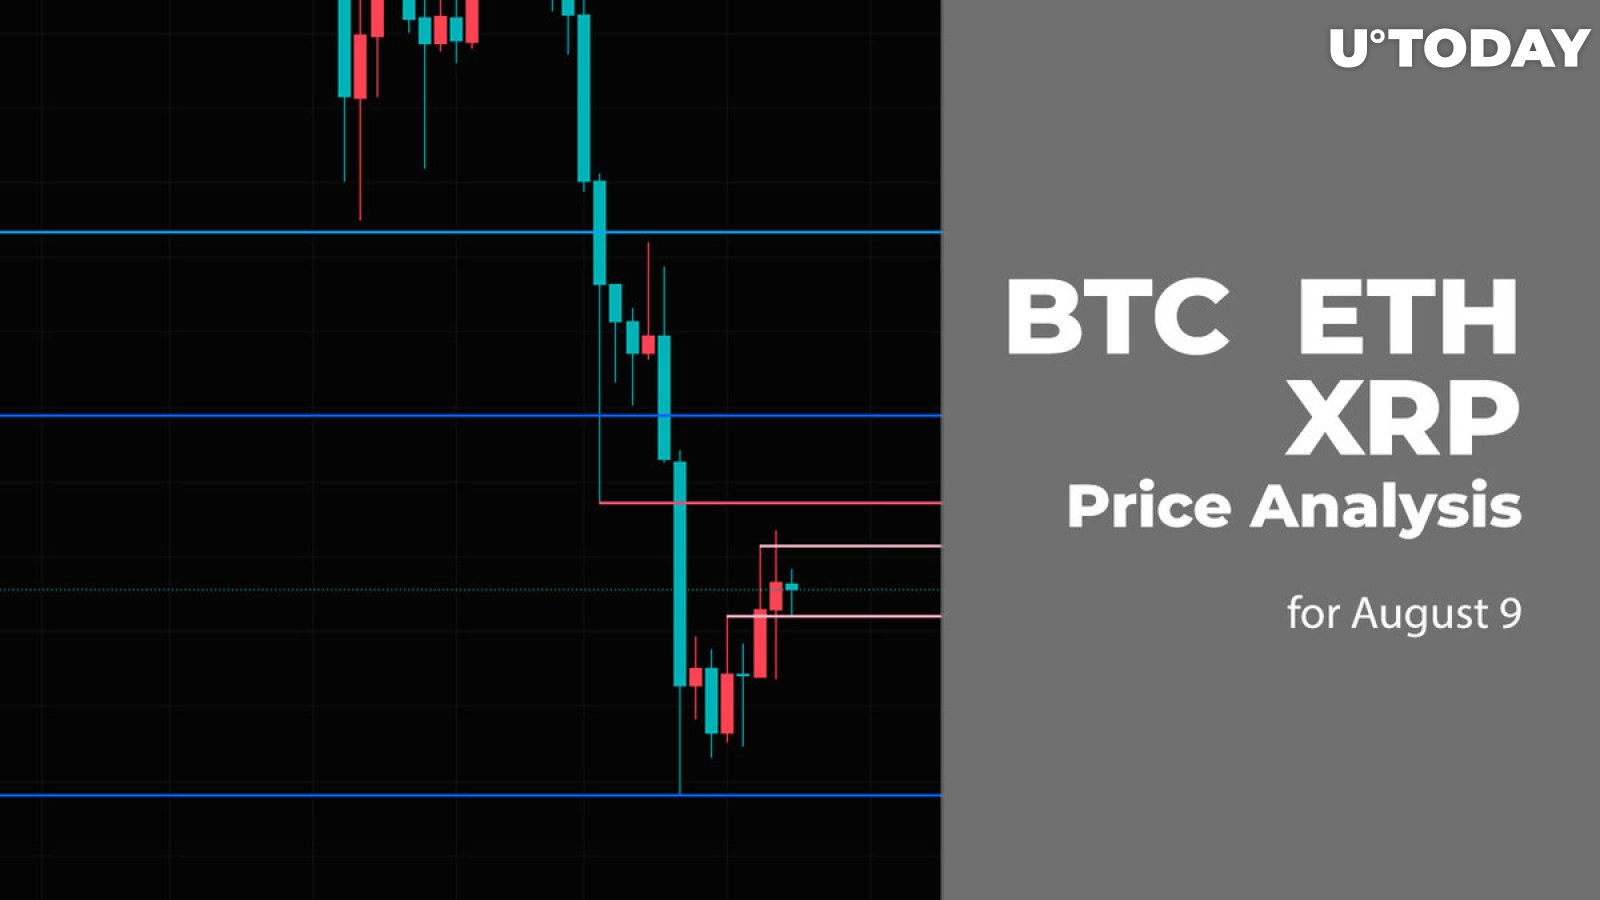 BTC, ETH and XRP Price Analysis for August 9